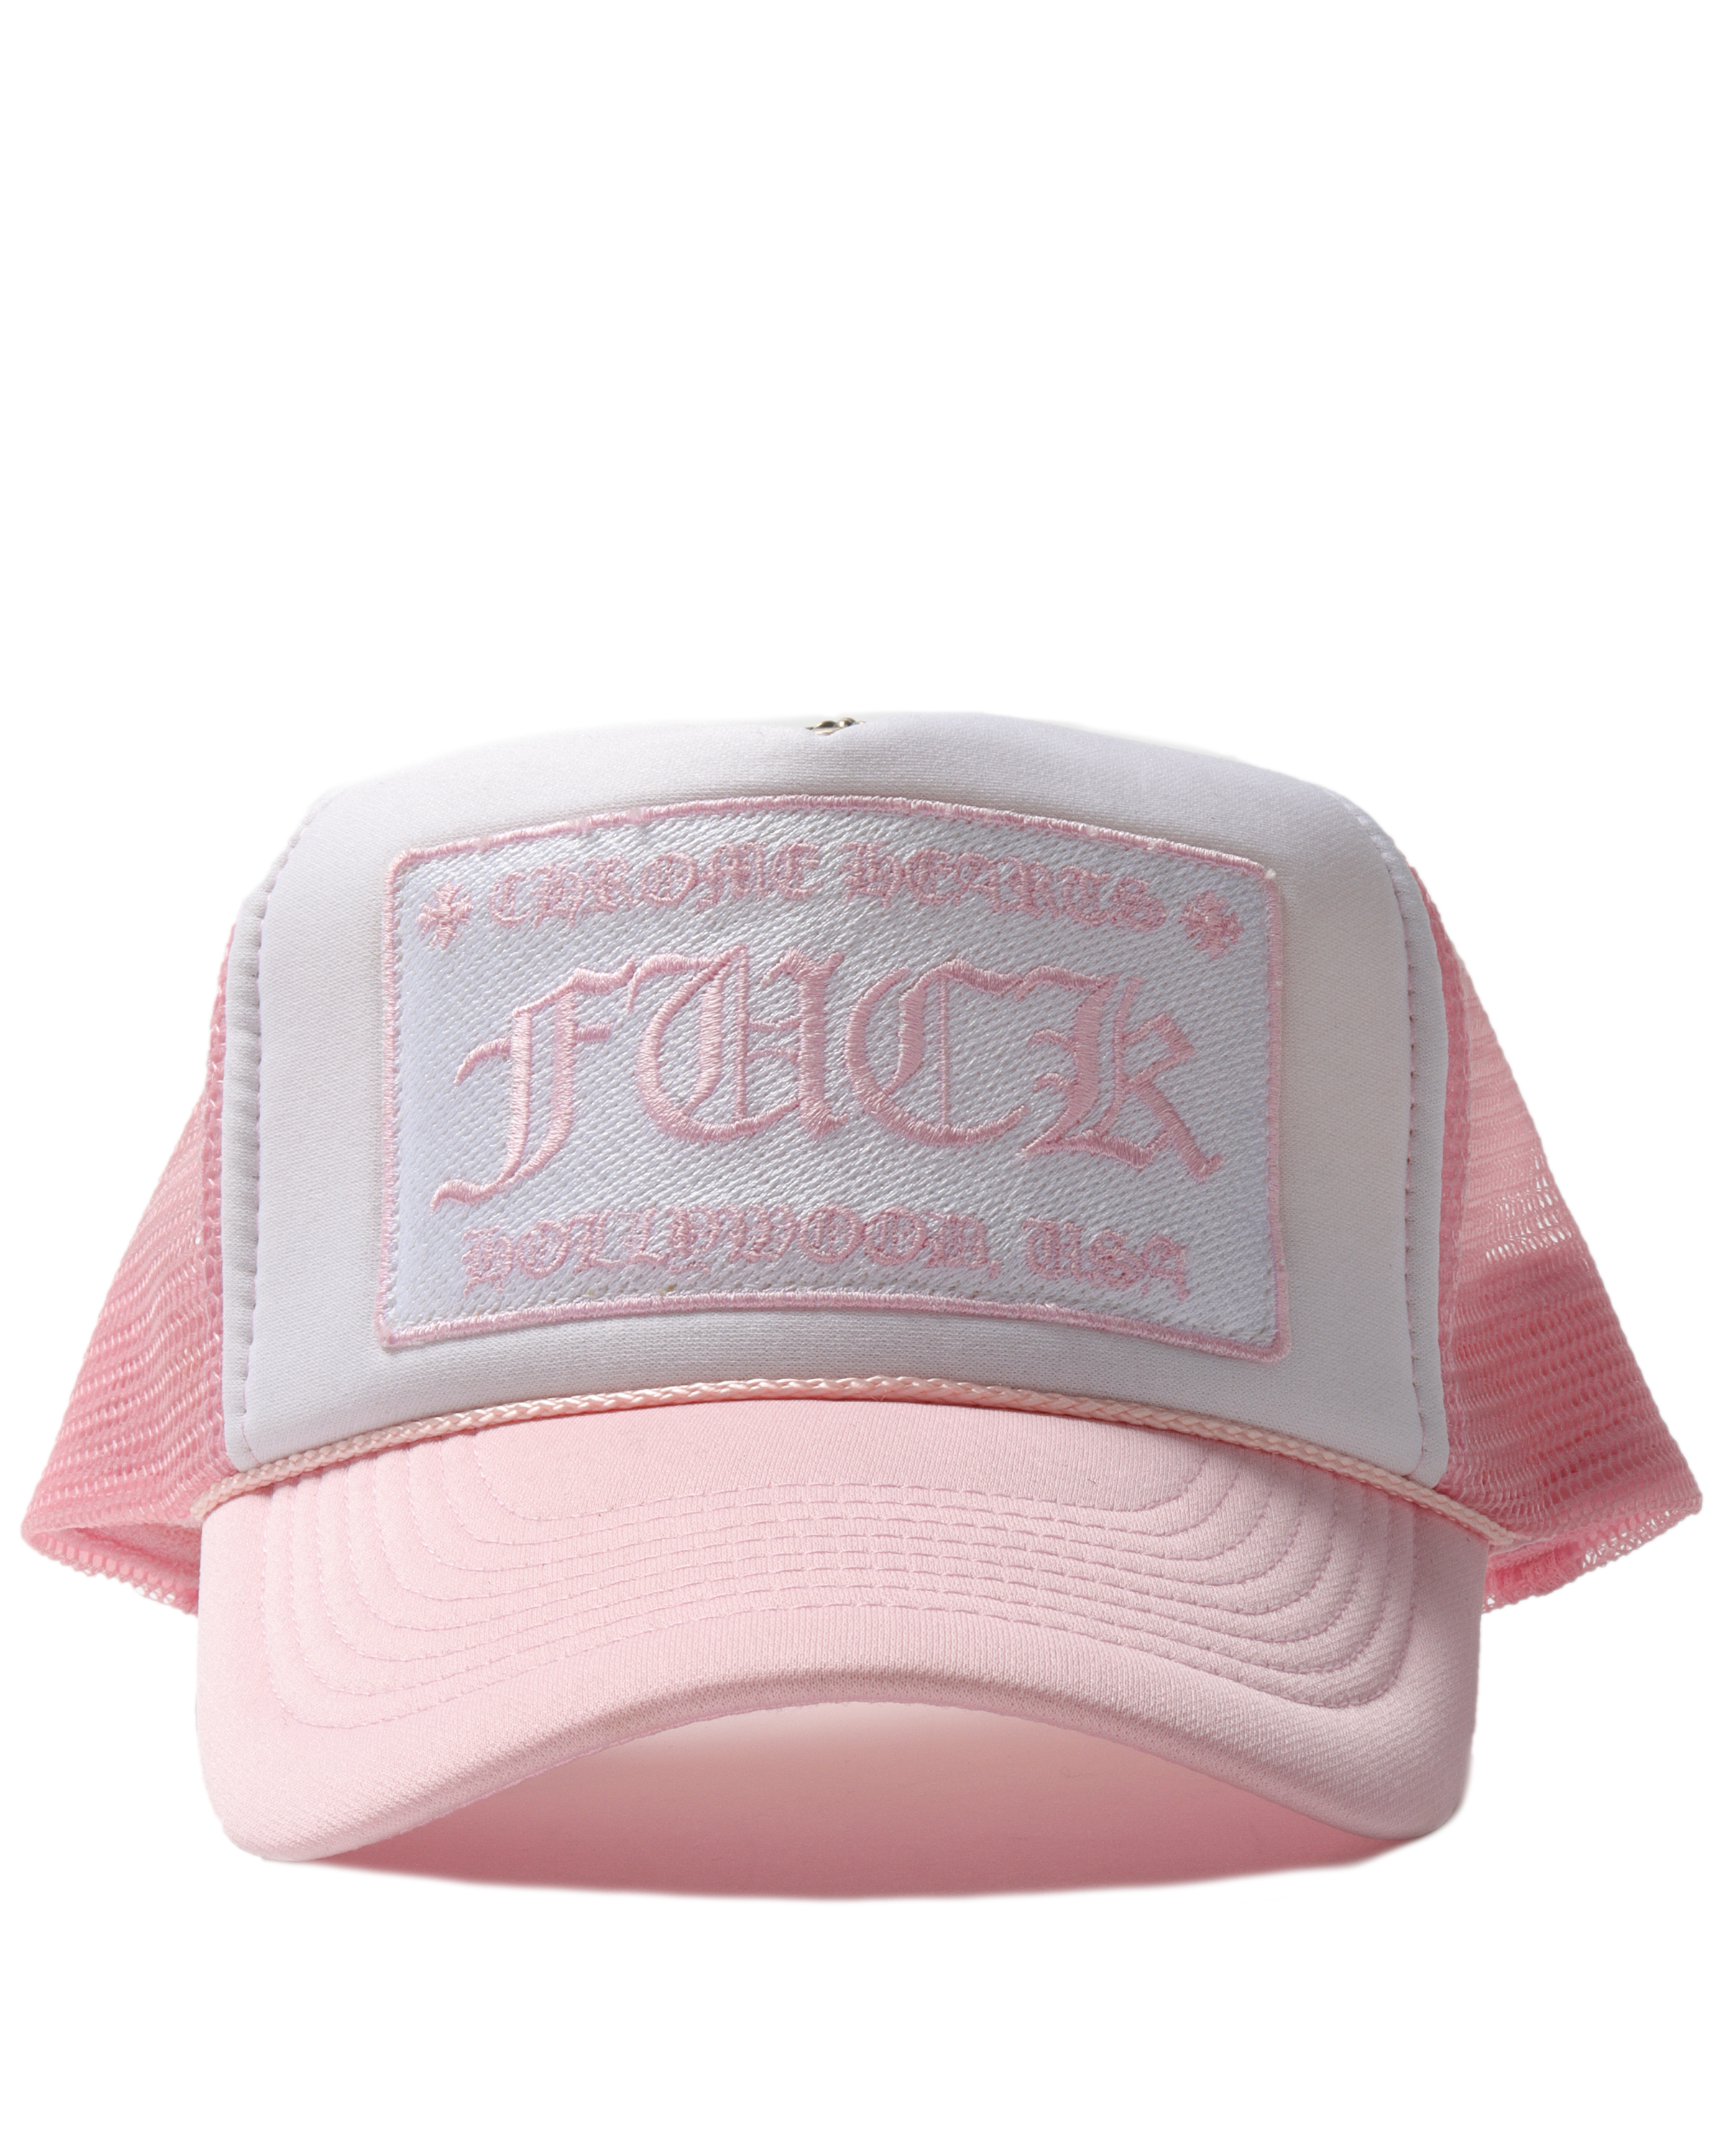 "Fuck" Curved Trucker Hat